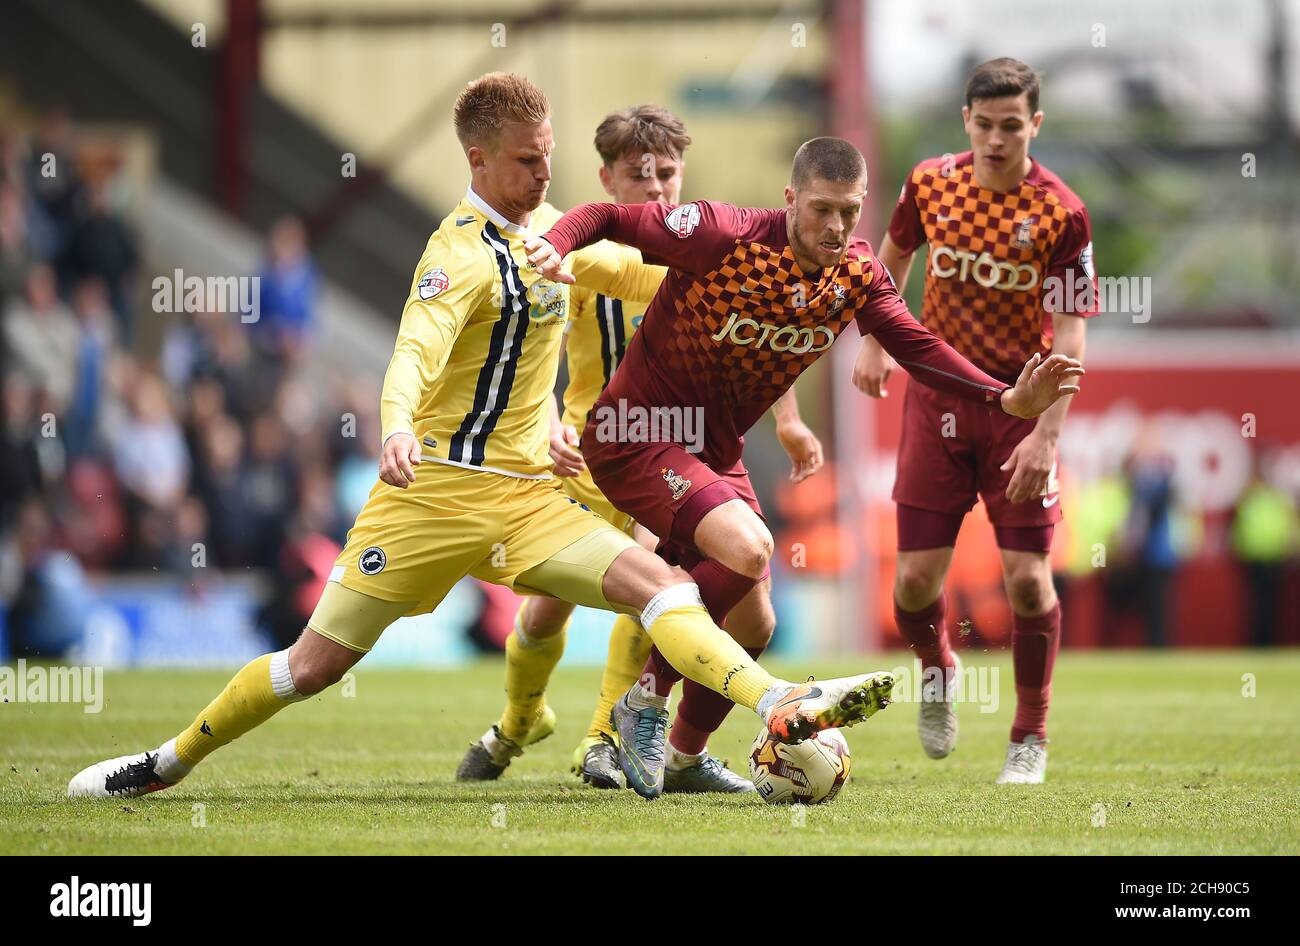 Milwall's Byron Webster (left) and Bradford City's Jamie Proctor battle for the ball during the Sky Bet League One play off, first leg match at Valley Parade, Bradford. PRESS ASSOCIATION Photo. Picture date: Sunday May 15, 2016. See PA story SOCCER Bradford. Photo credit should read: Jon Buckle/PA Wire. RESTRICTIONS: No use with unauthorised audio, video, data, fixture lists, club/league logos or 'live' services. Online in-match use limited to 75 images, no video emulation. No use in betting, games or single club/league/player publications. Stock Photo